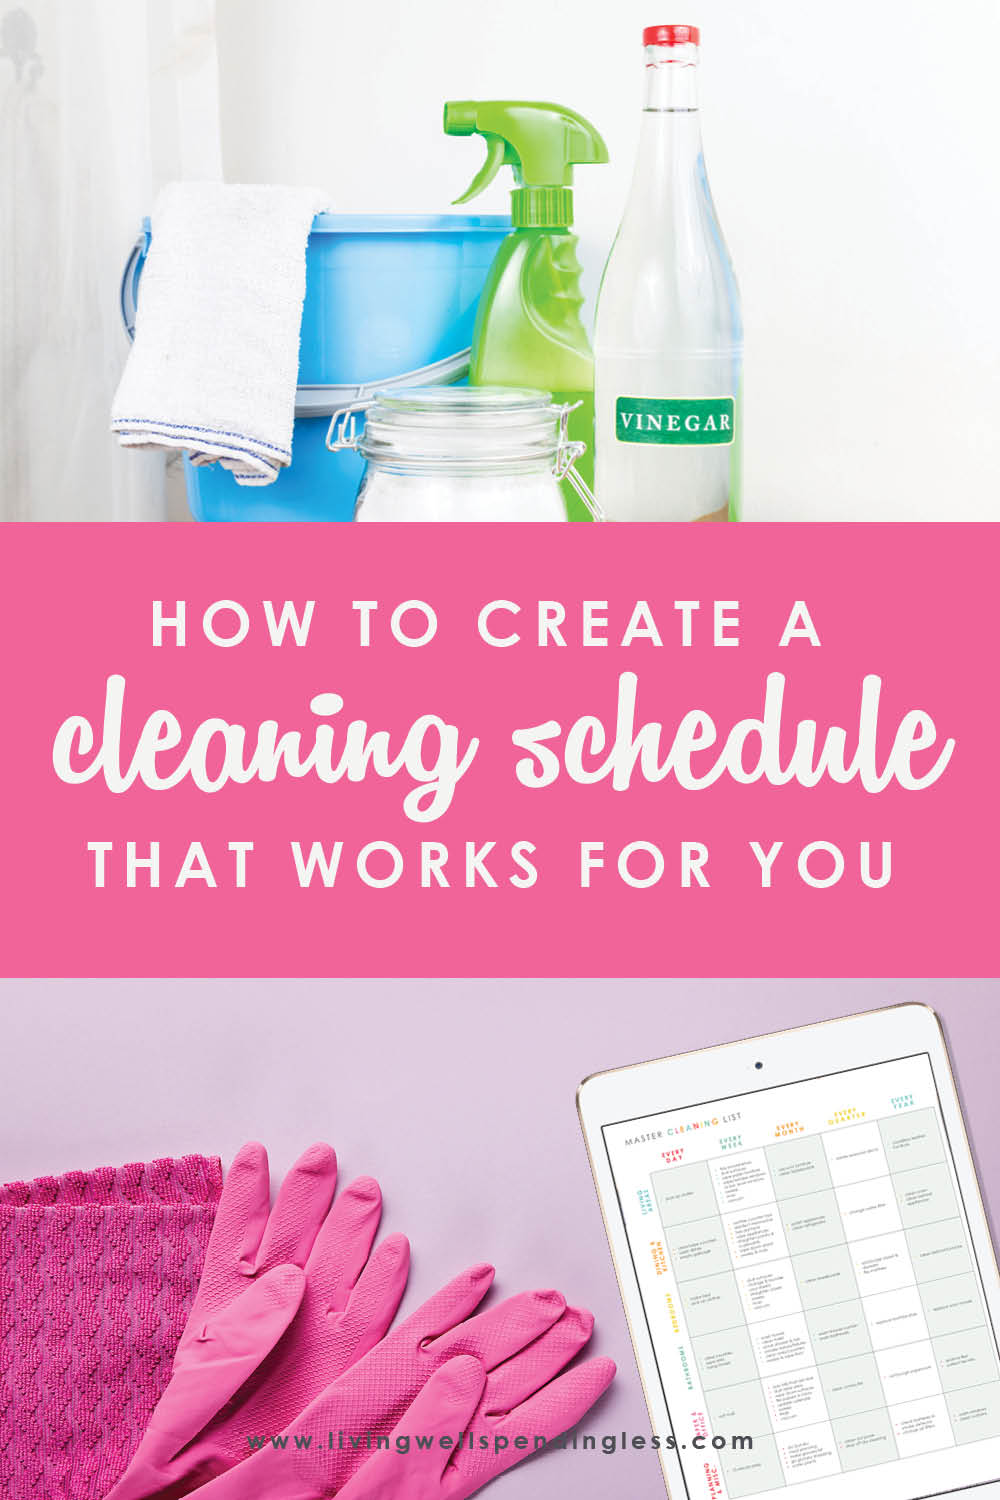 Want a clean house but have no idea where to begin? Believe it or not, a cleaning schedule can actually make keeping your house clean a whole lot easier! In just 3 easy steps, this super practical post will show you exactly how to create a personalized cleaning plan that will work for your own home. FREE DOWNLOADS included making it that much easier for you! #cleaningschedule #cleanhome #housecleaning #timemanagement #cleaning #cleaningplan #freeprintables #cleaningworksheets #cleaningchecklist